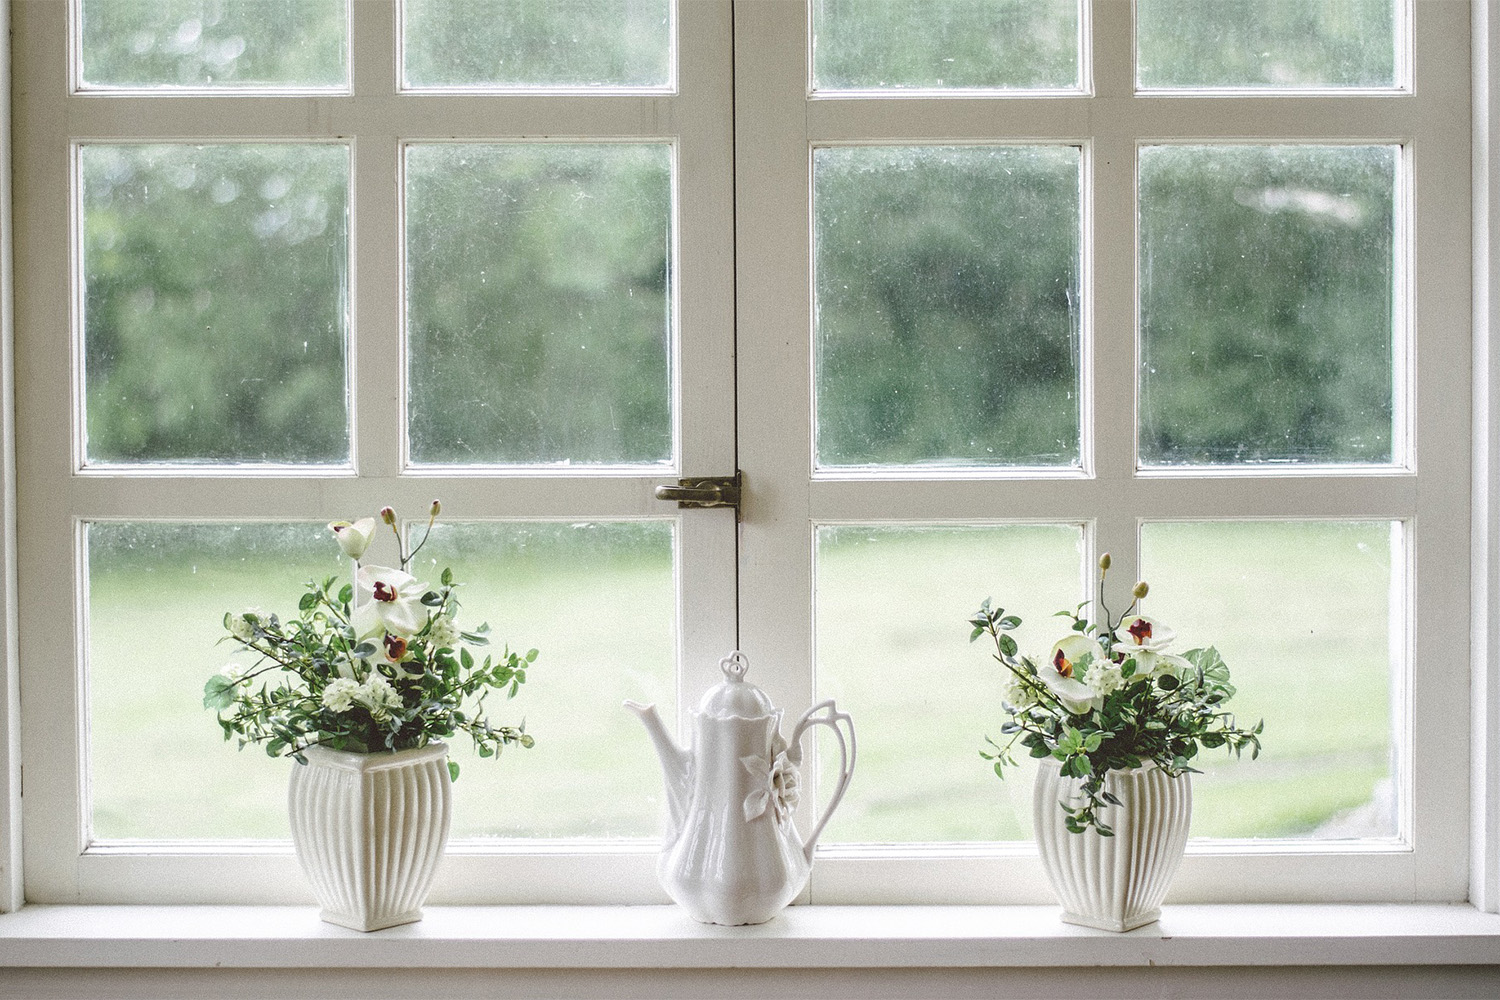 window with white panes, and potted plants on window sill 